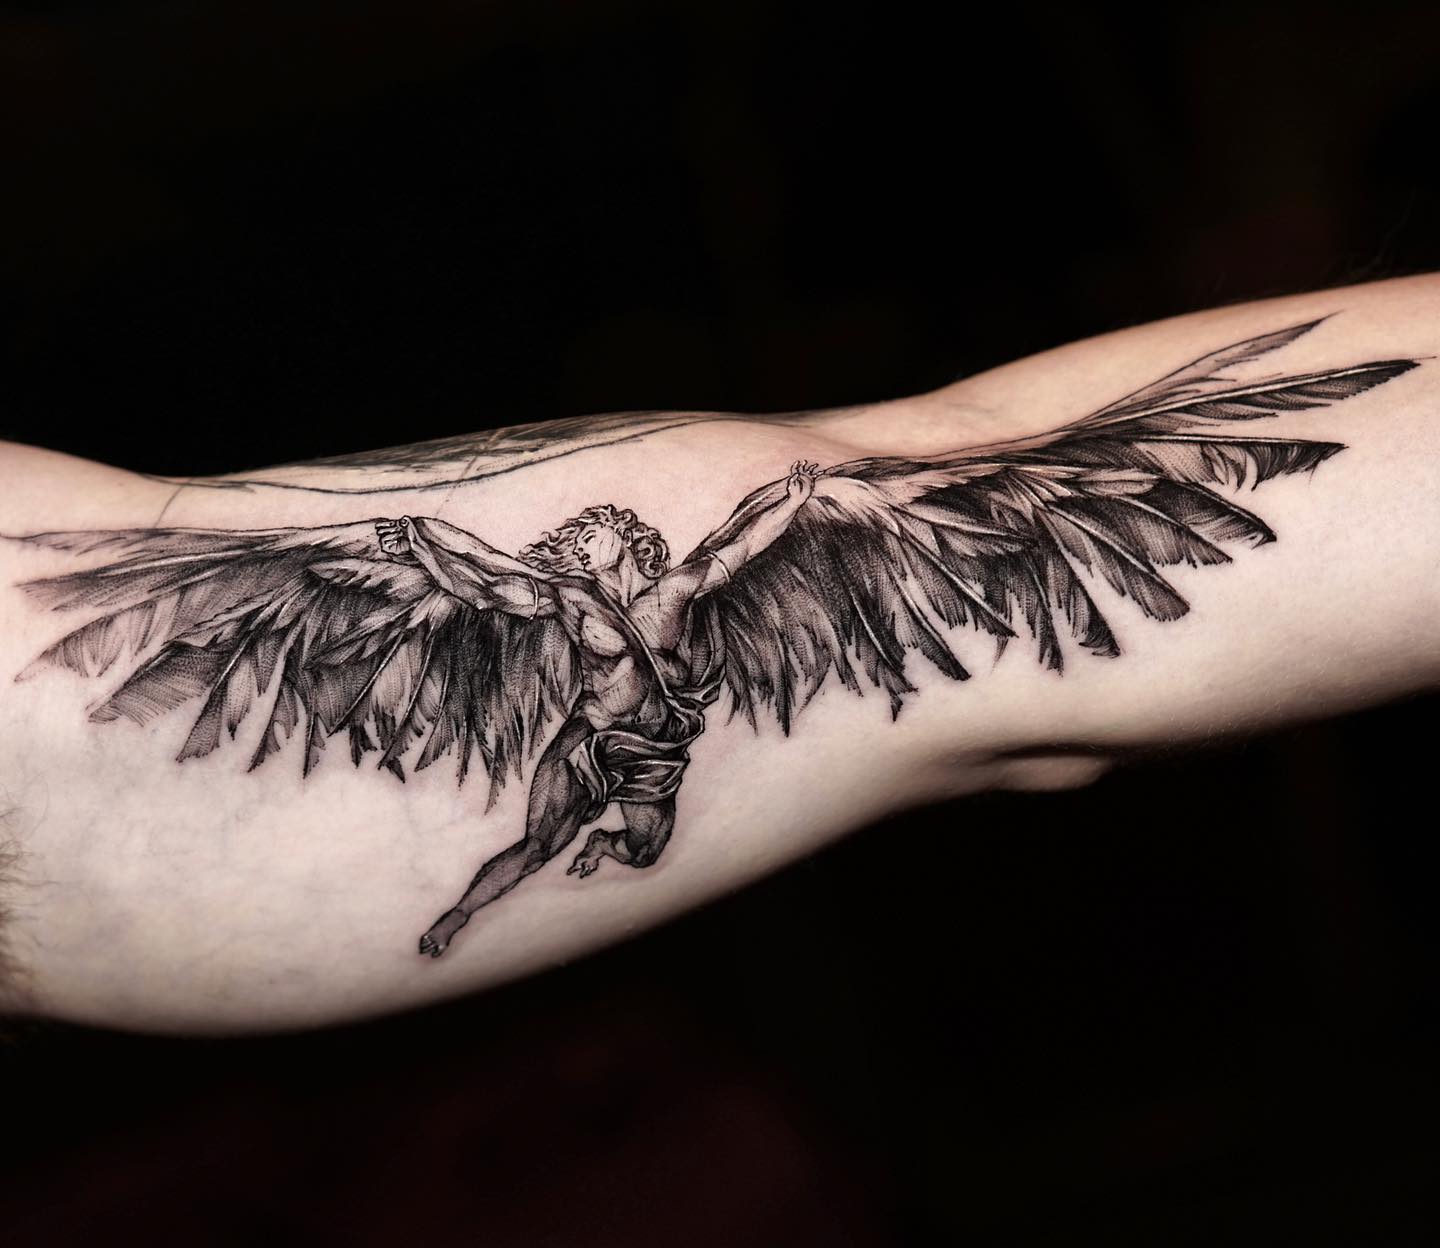 This is awesome and totally making me rethink which version of Icarus I  want  Mythology tattoos Icarus tattoo Greek mythology tattoos